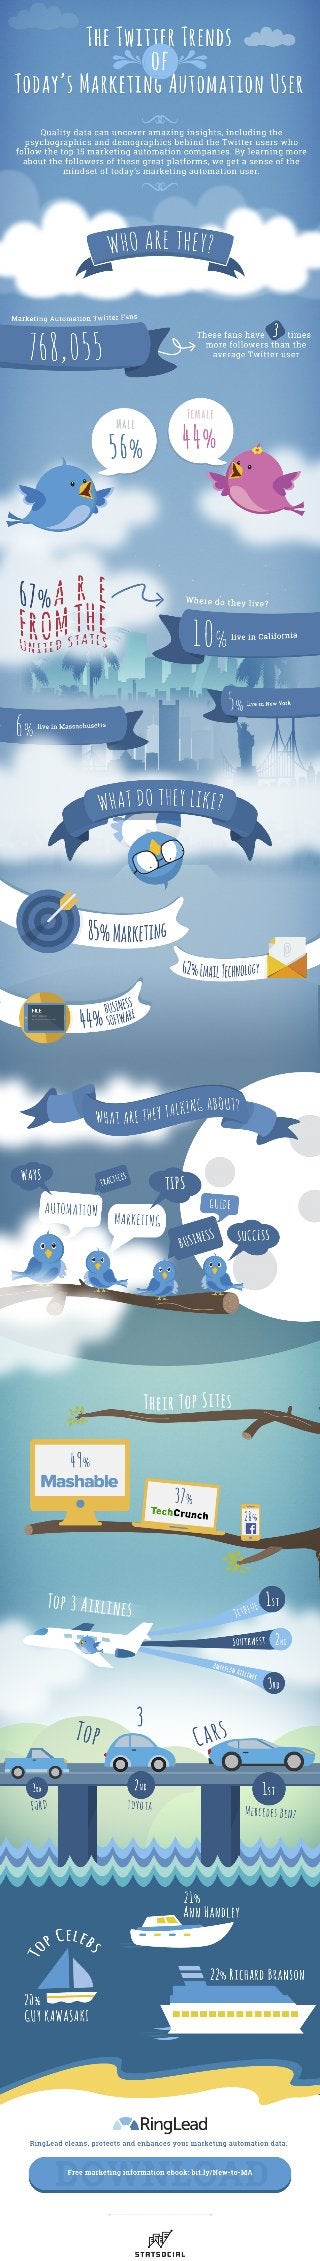 The Twitter Trends of Today’s Marketing Automation User